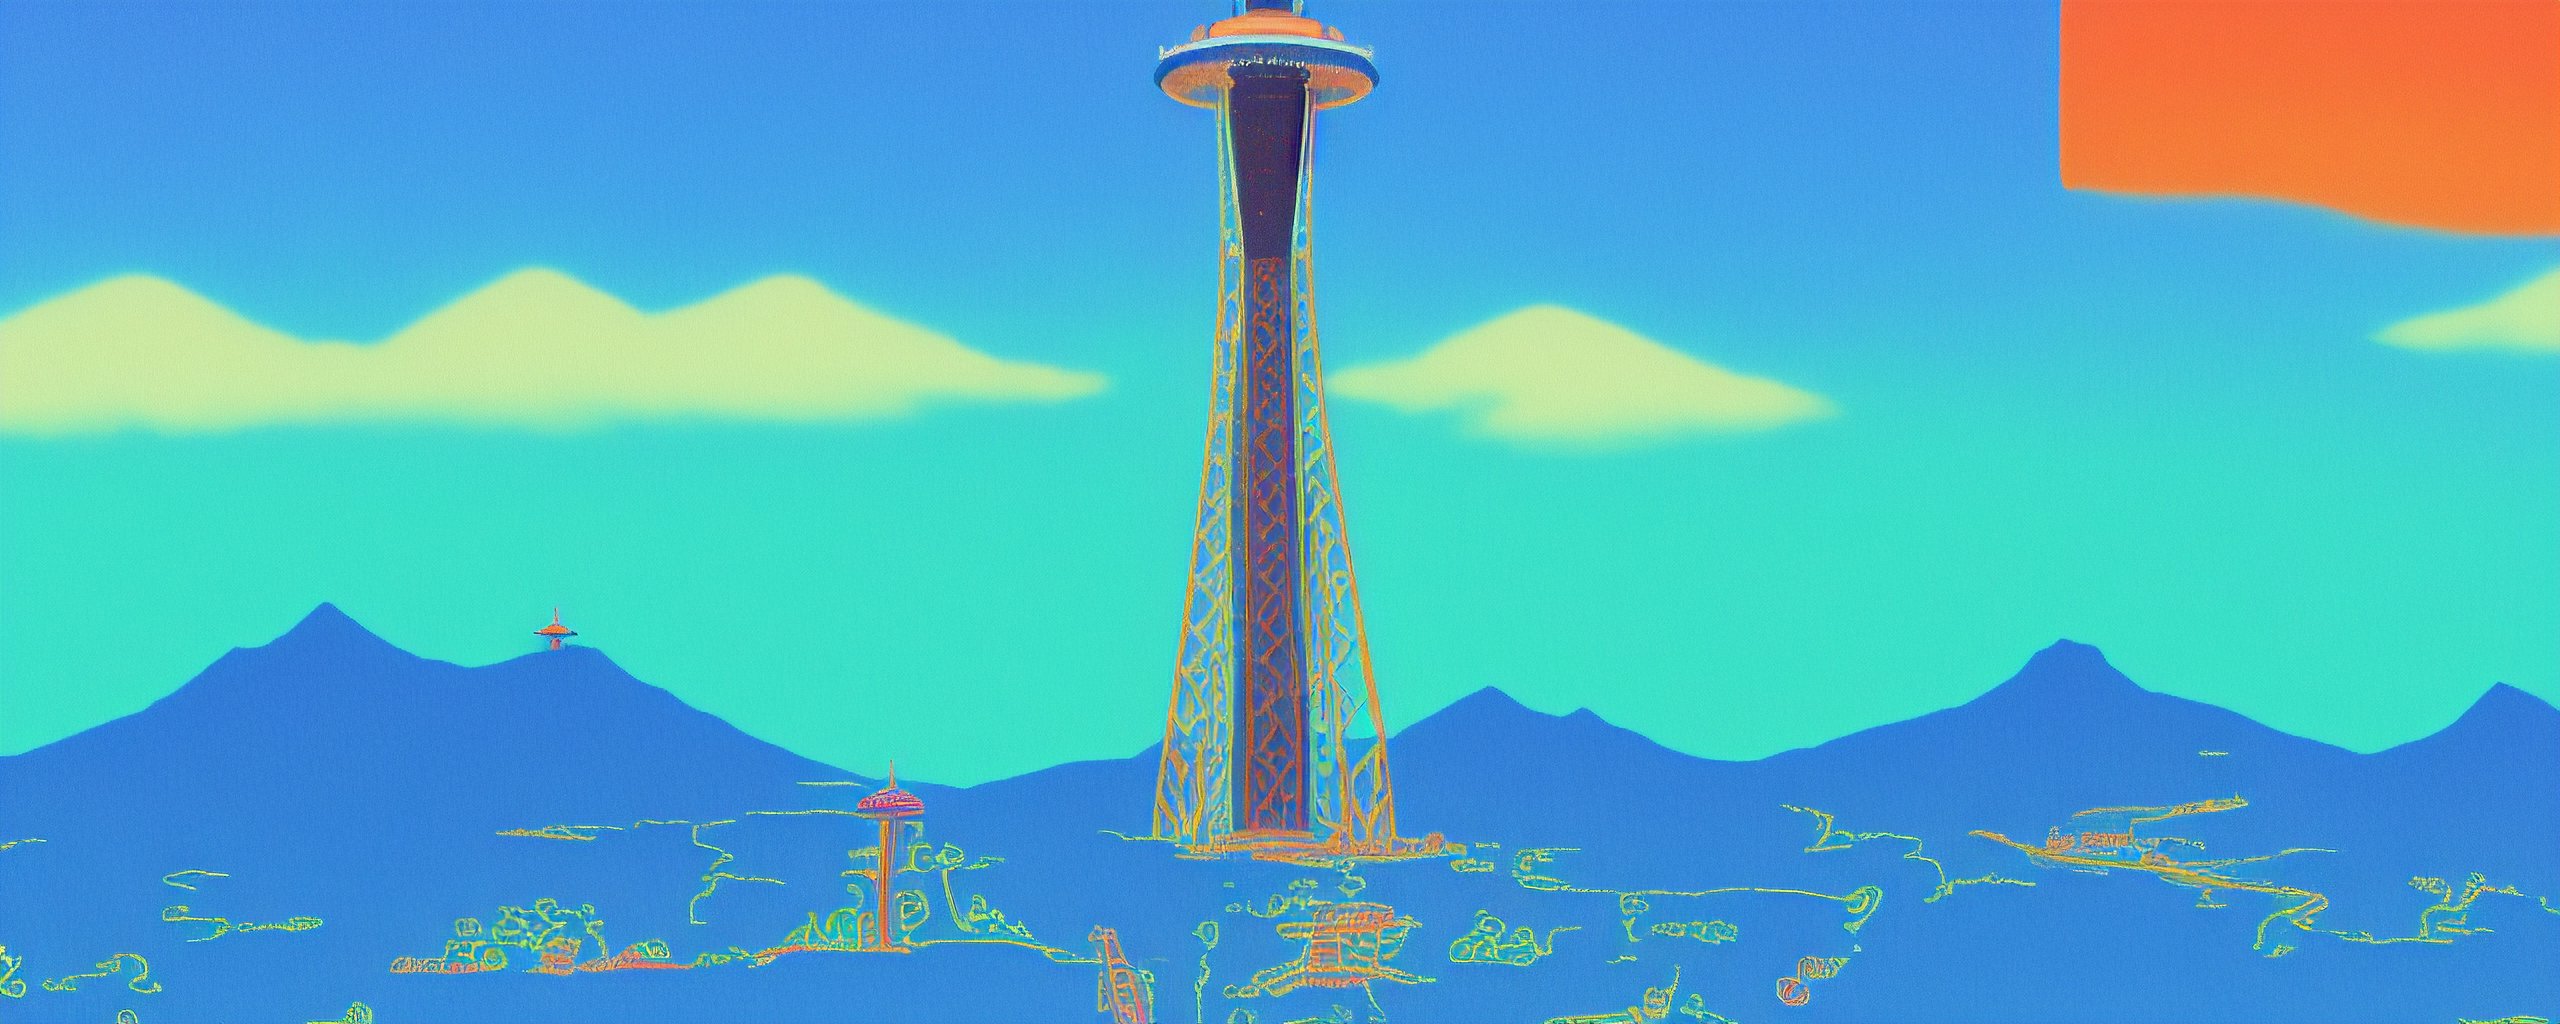 An image of landscape, breath of the wild, vaporwave palette, CGA colors, space needle in distance, manga style, thick outlines, ink, acid trip, kanji, genshin impact